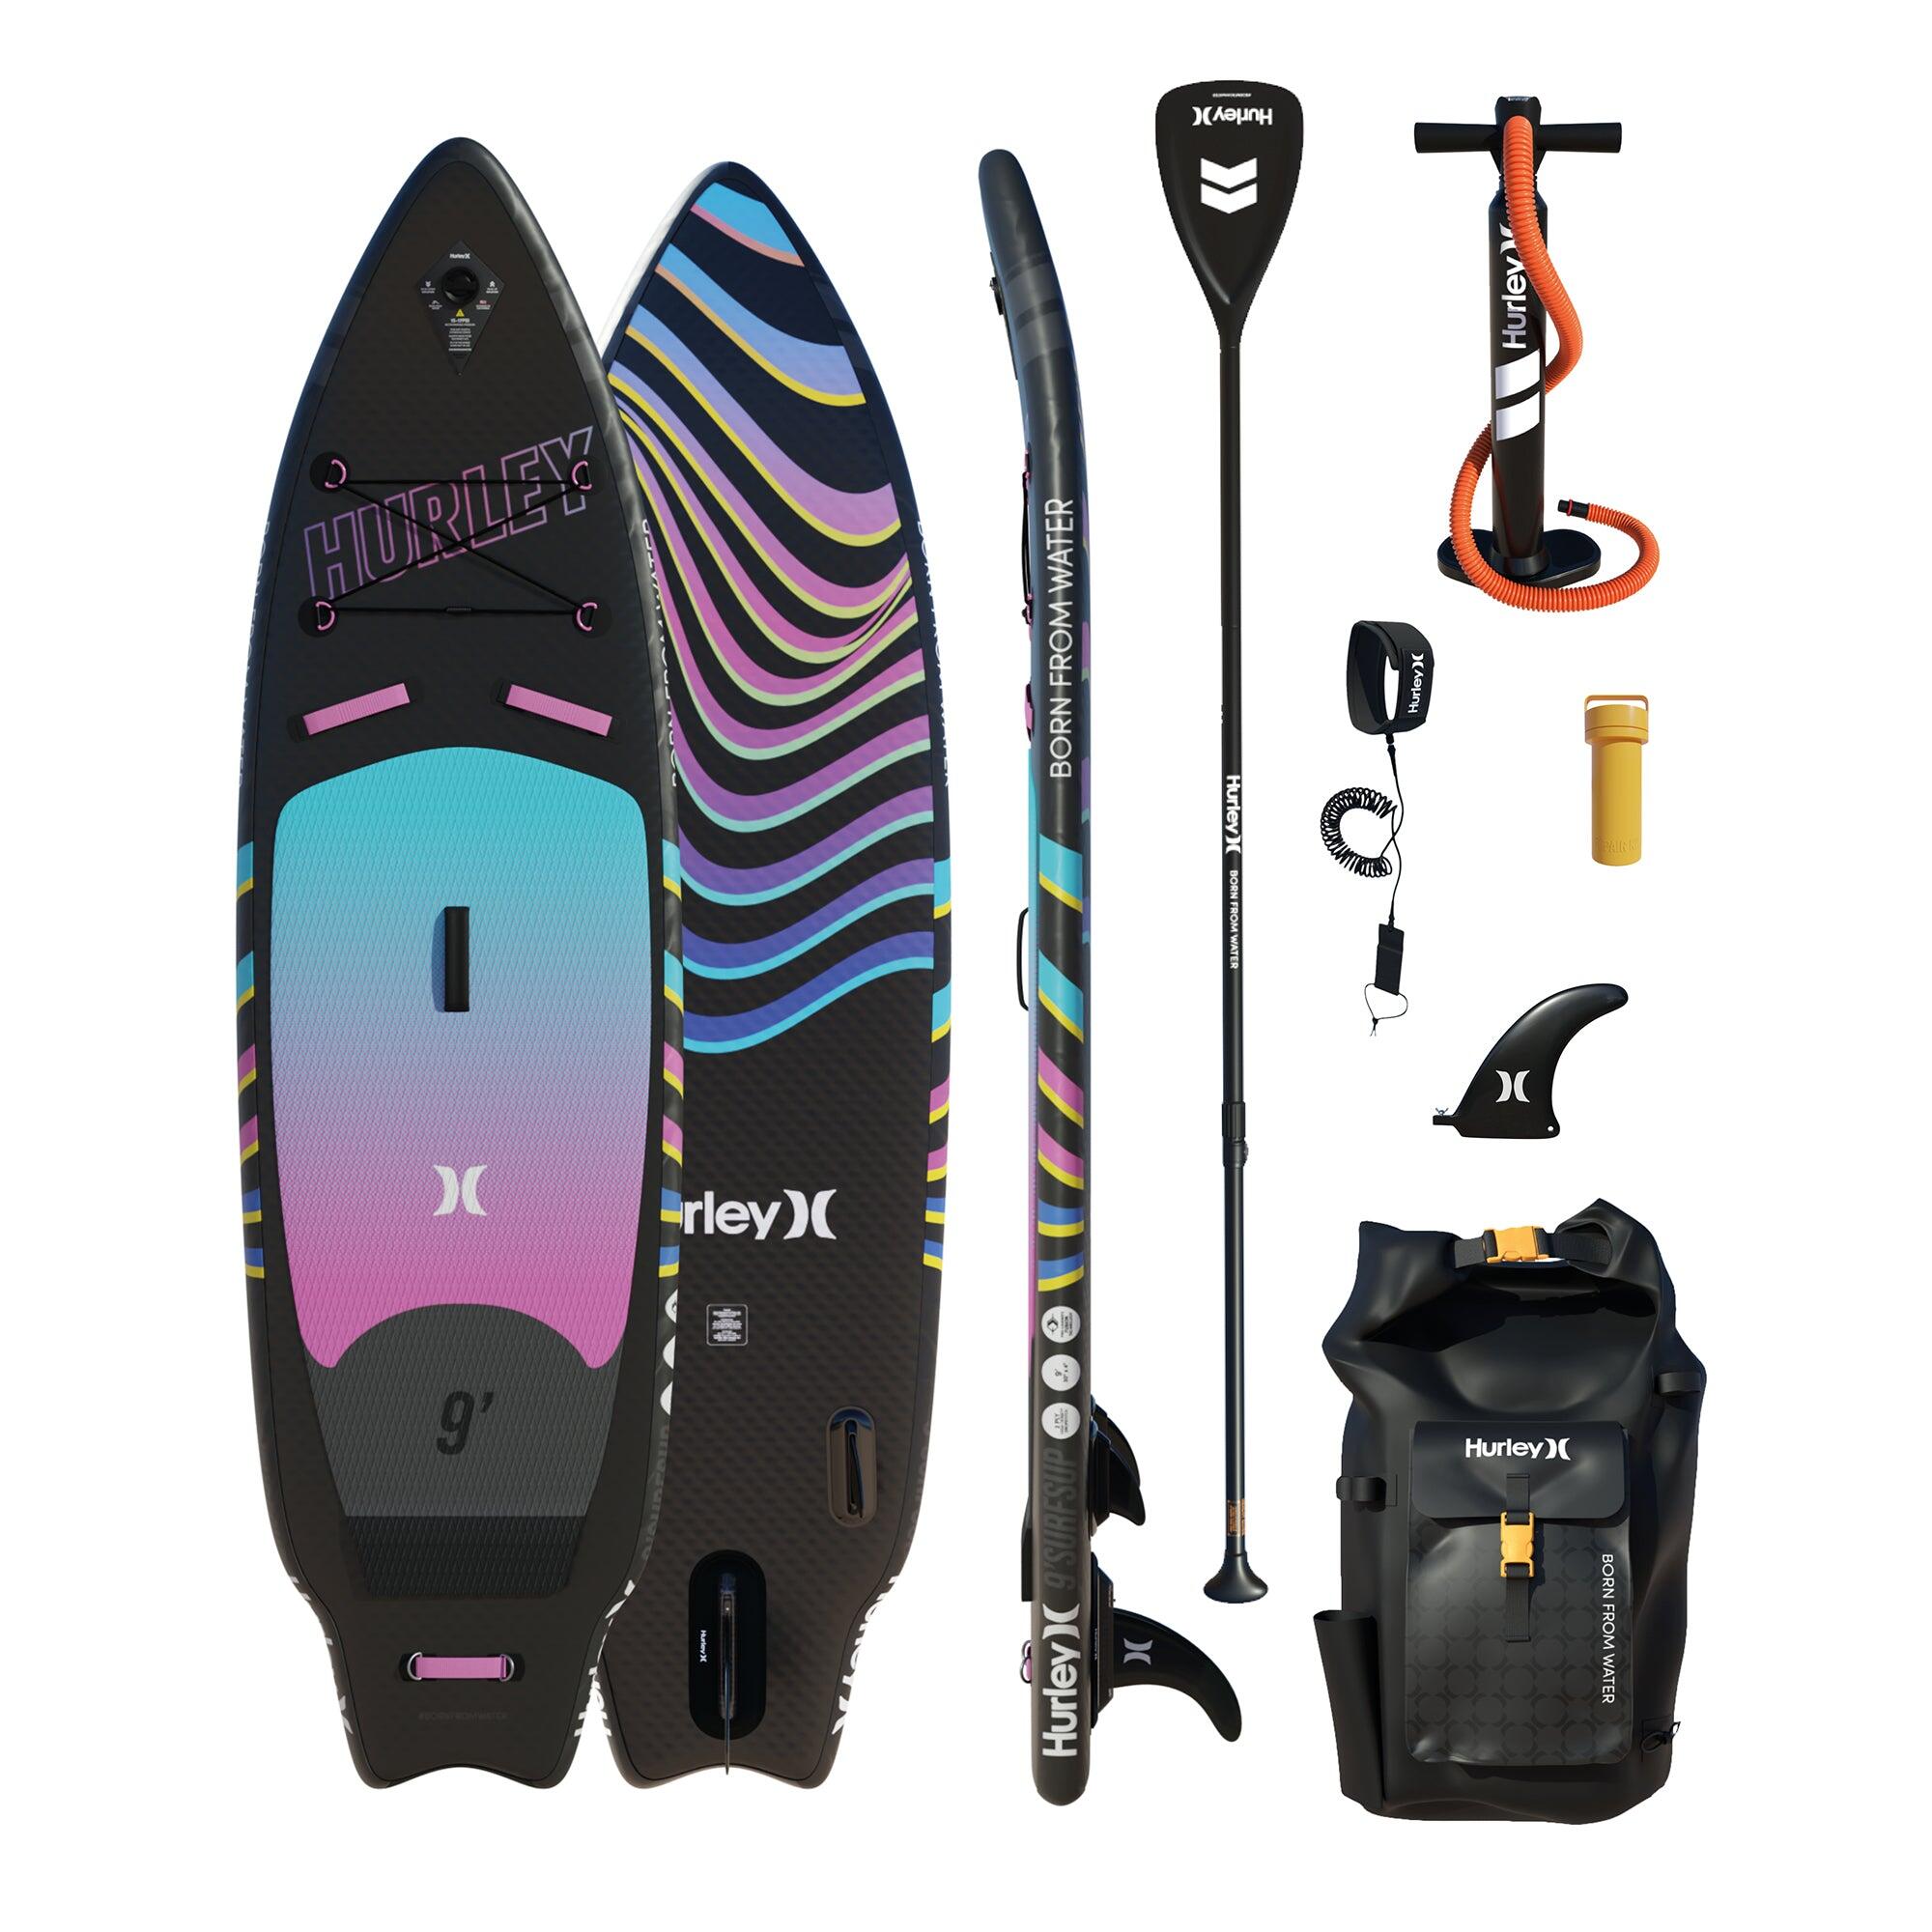 HURLEY Hurley Phantomsurf OMBRE 9' Inflatable Paddle Board Package